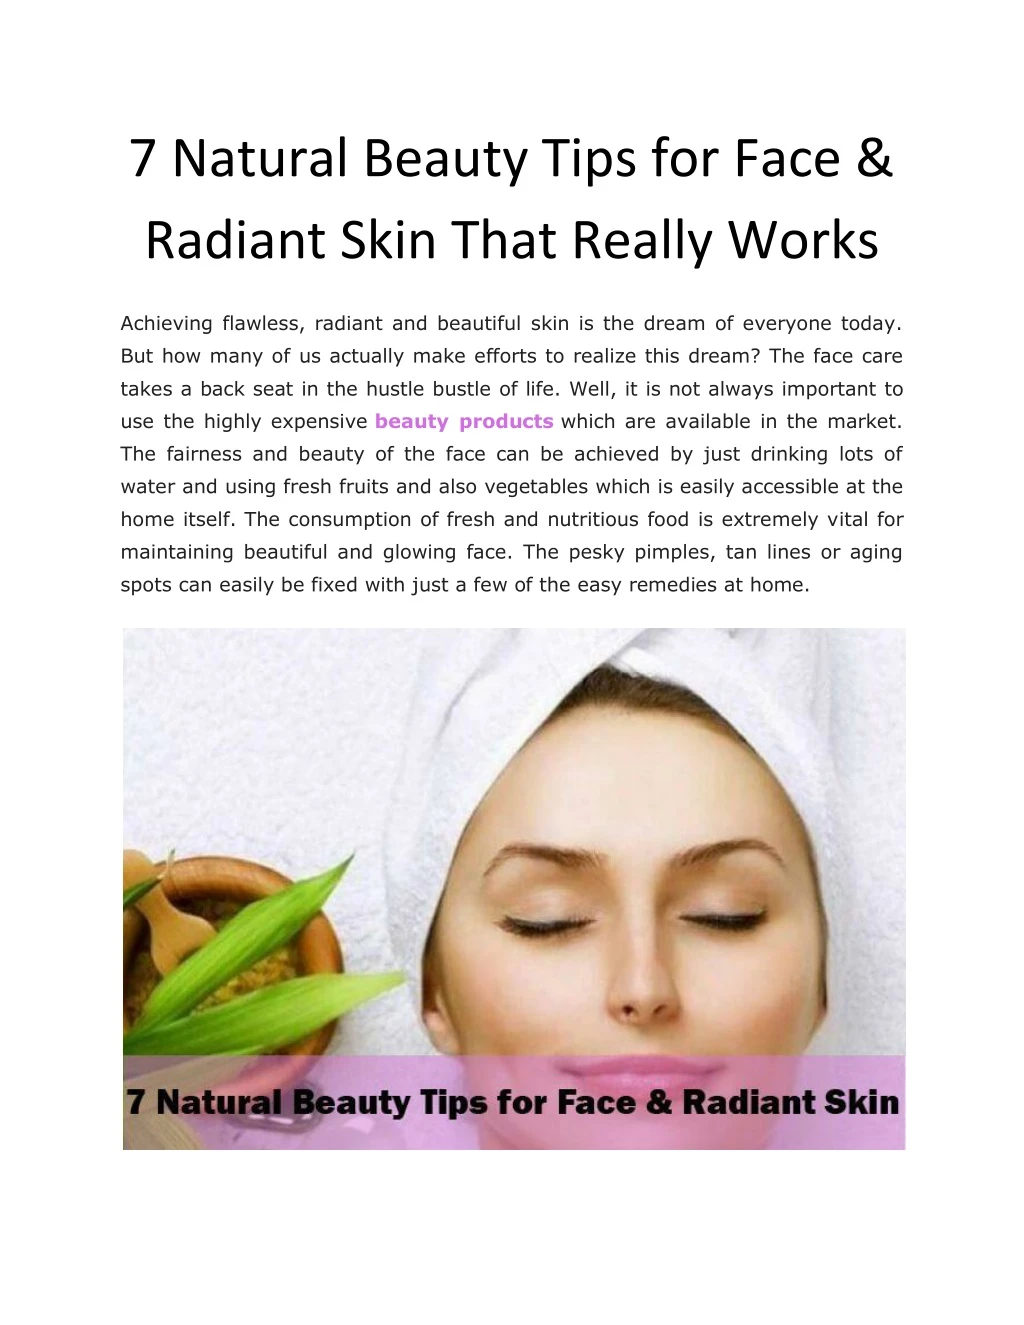 7 natural beauty tips for face radiant skin that